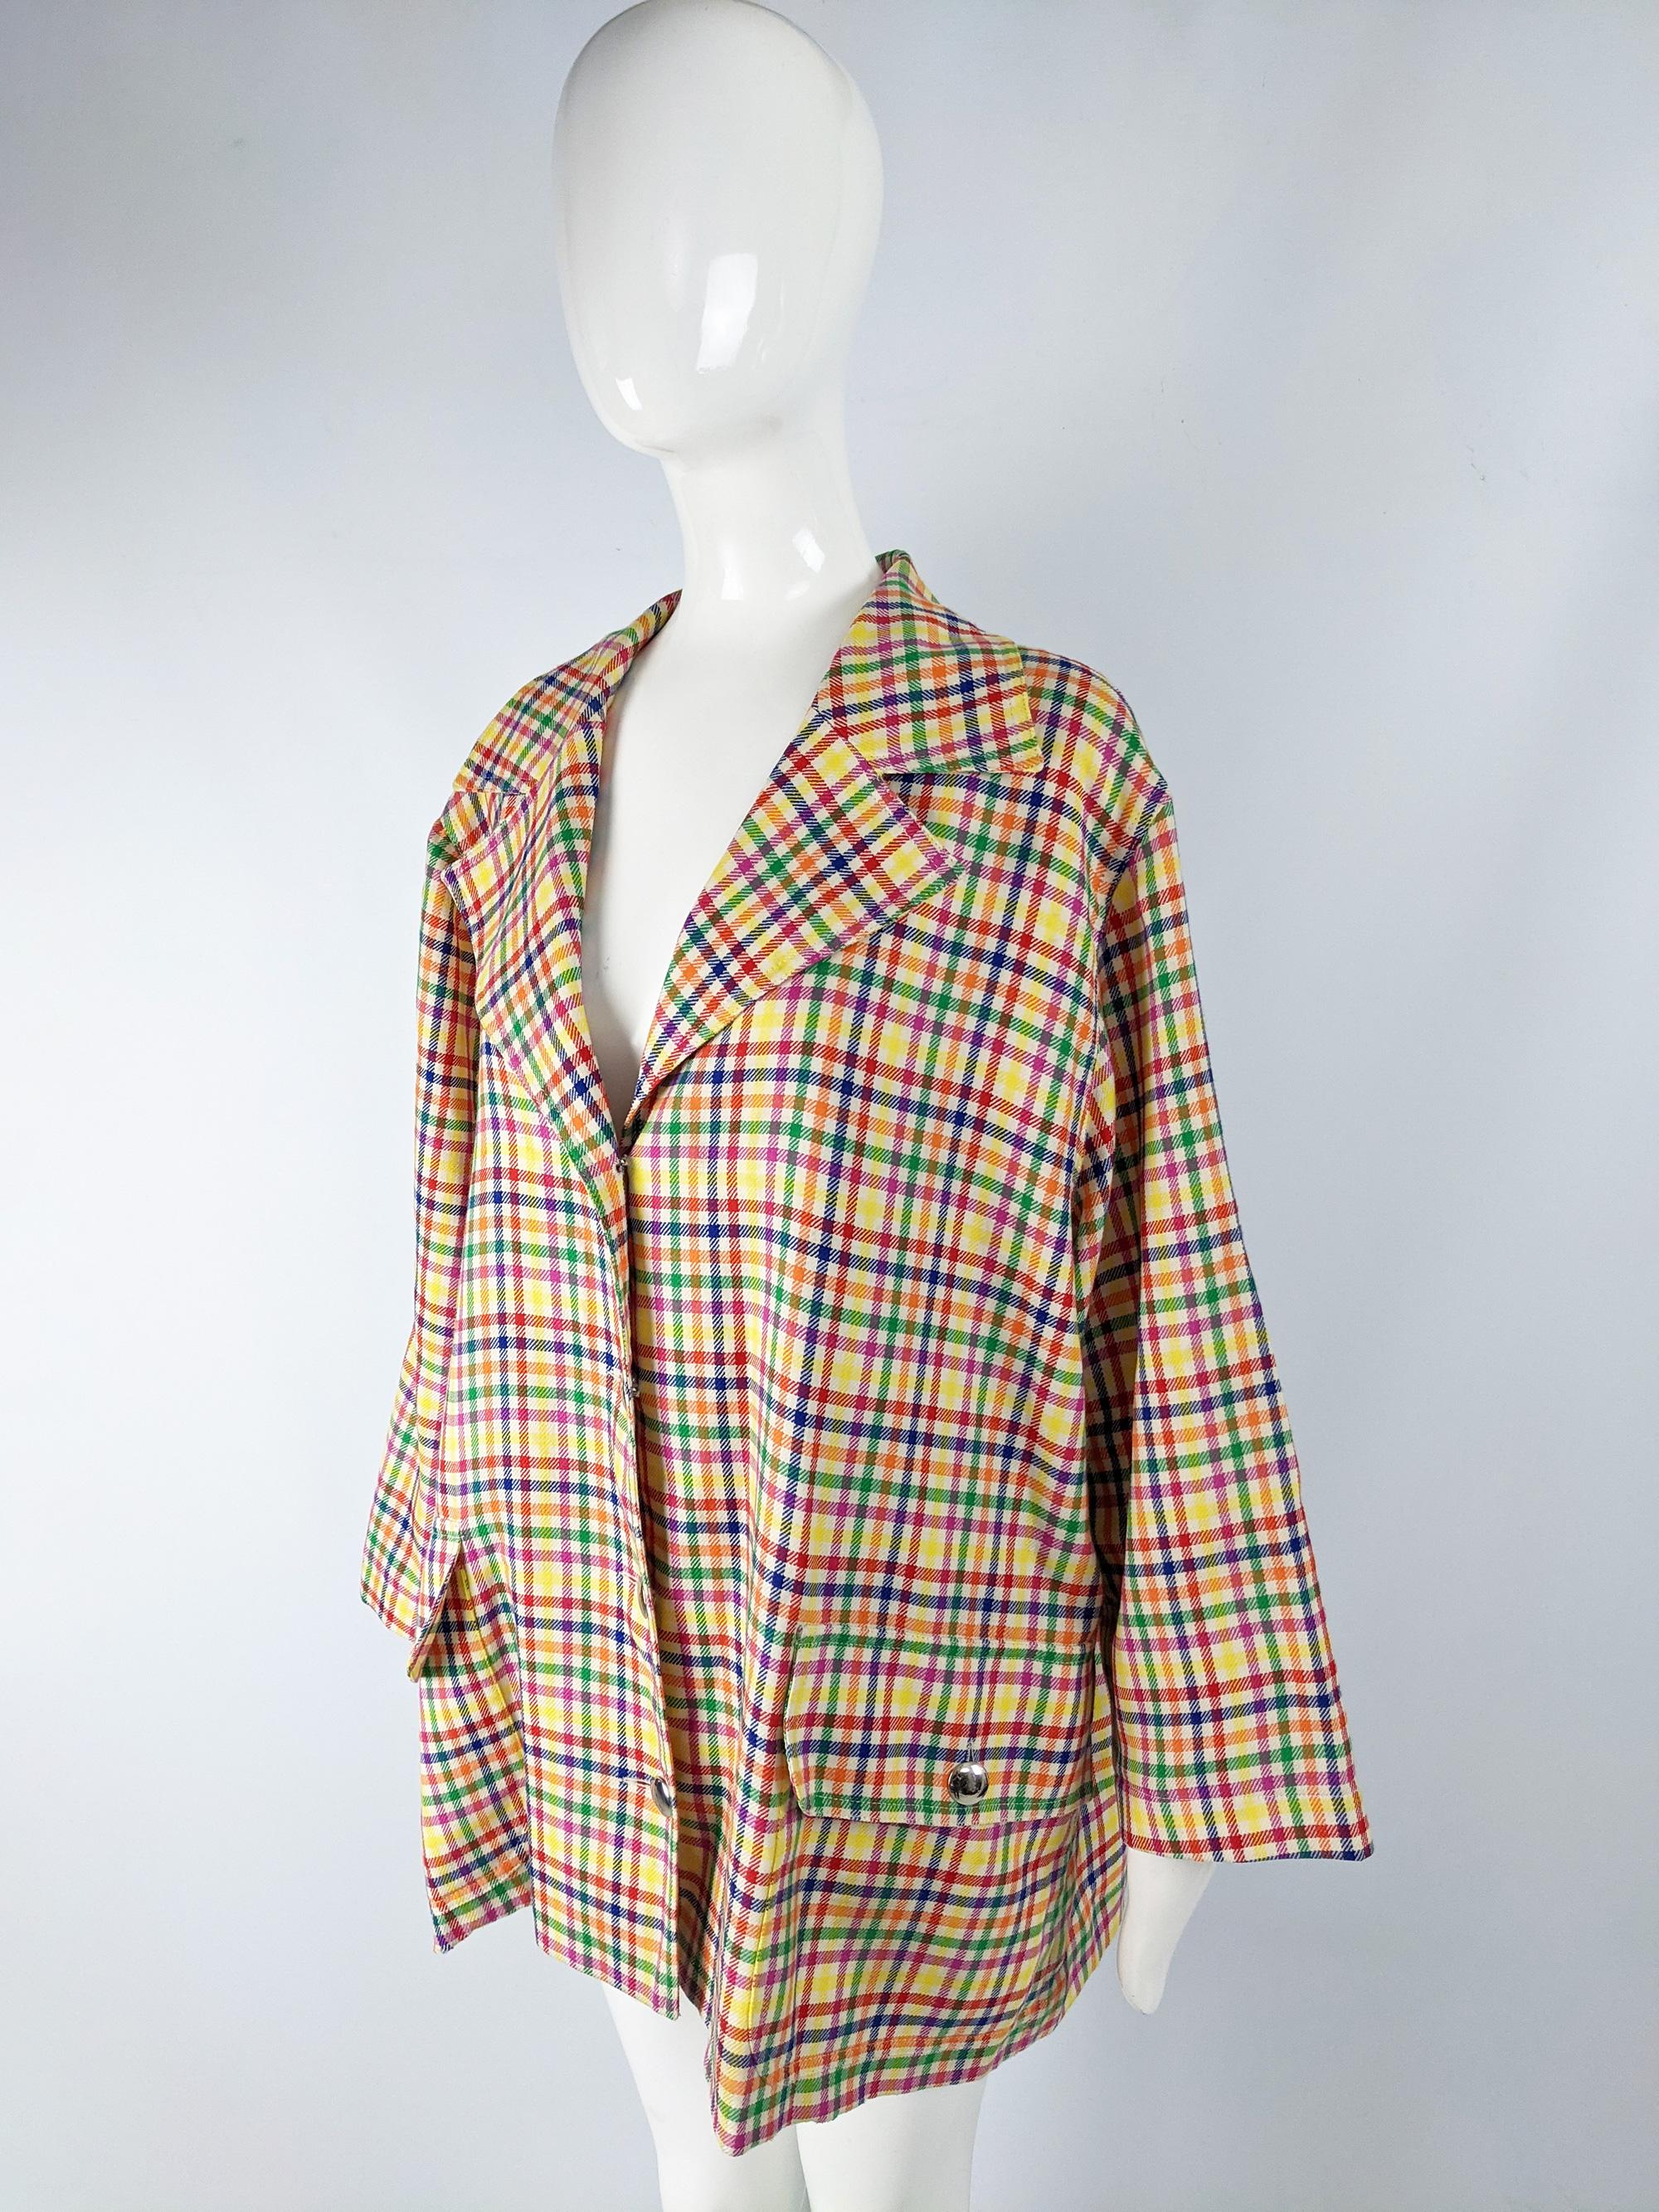 Nina Ricci Vintage Oversized Wool Checked Coat, 1980s In Good Condition For Sale In Doncaster, South Yorkshire